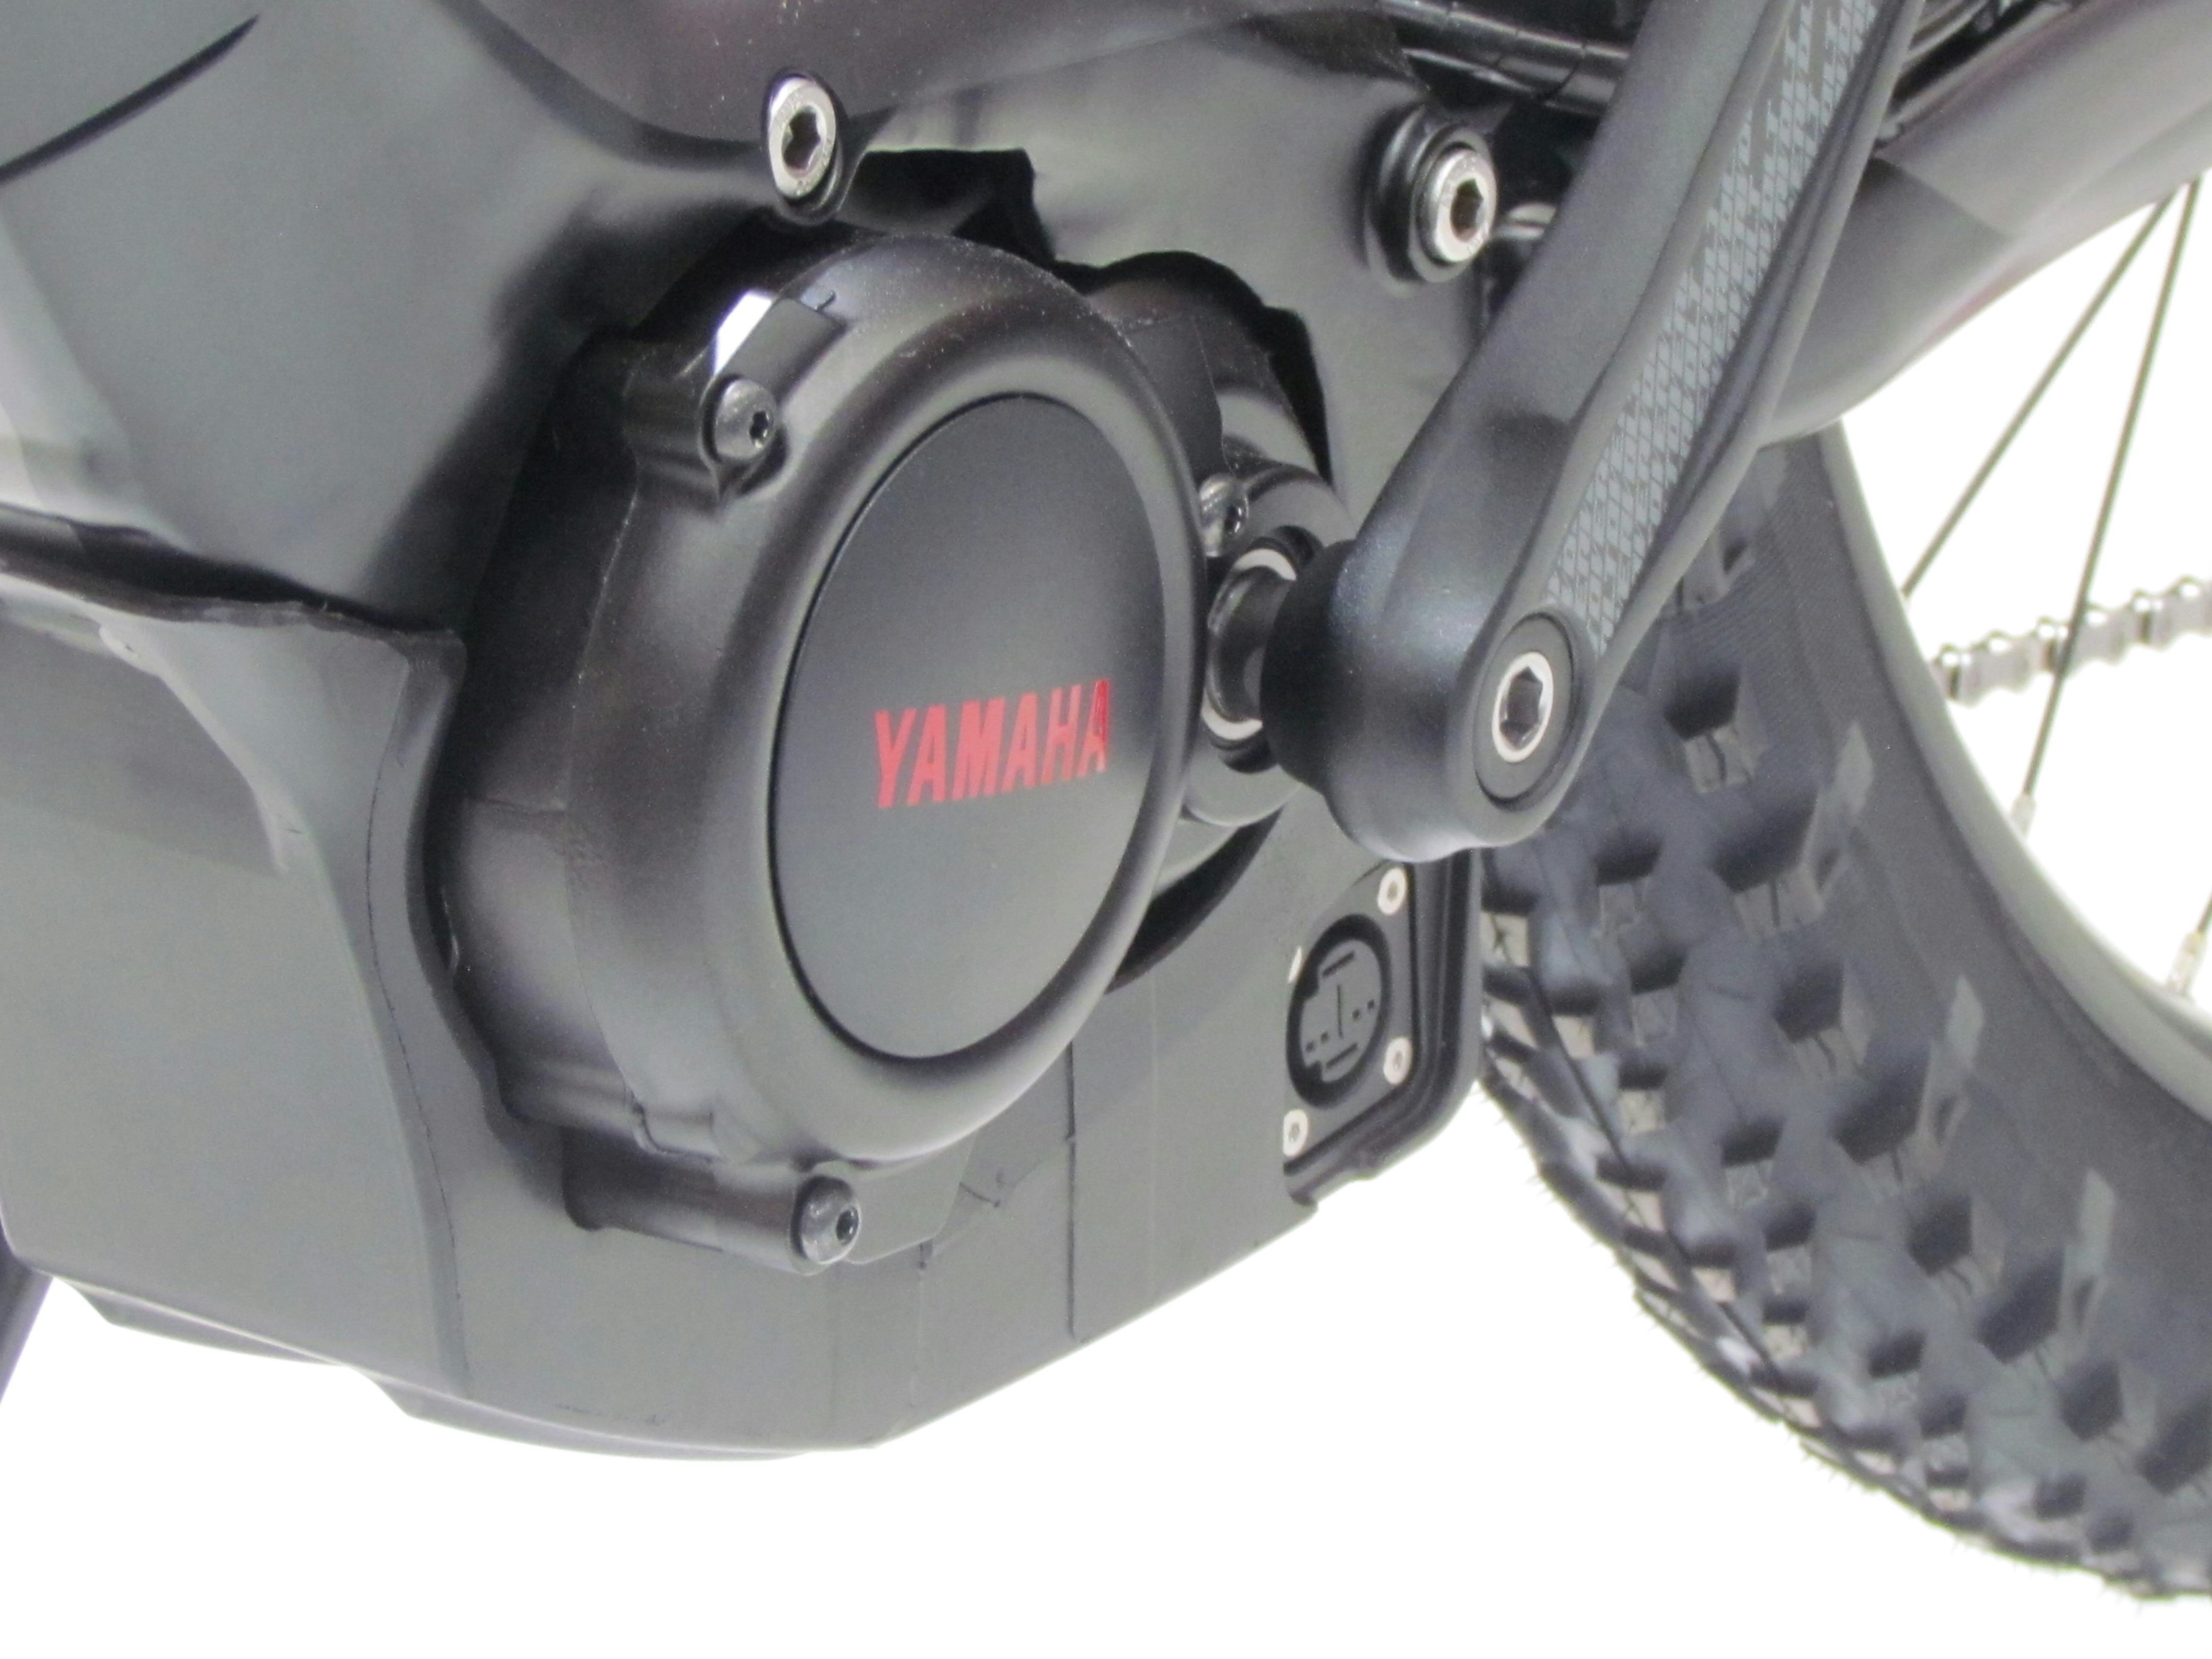 Yamaha launched its 3rd mid-motor generation in a peculiar manner at Eurobike. – Photo Bike Europe